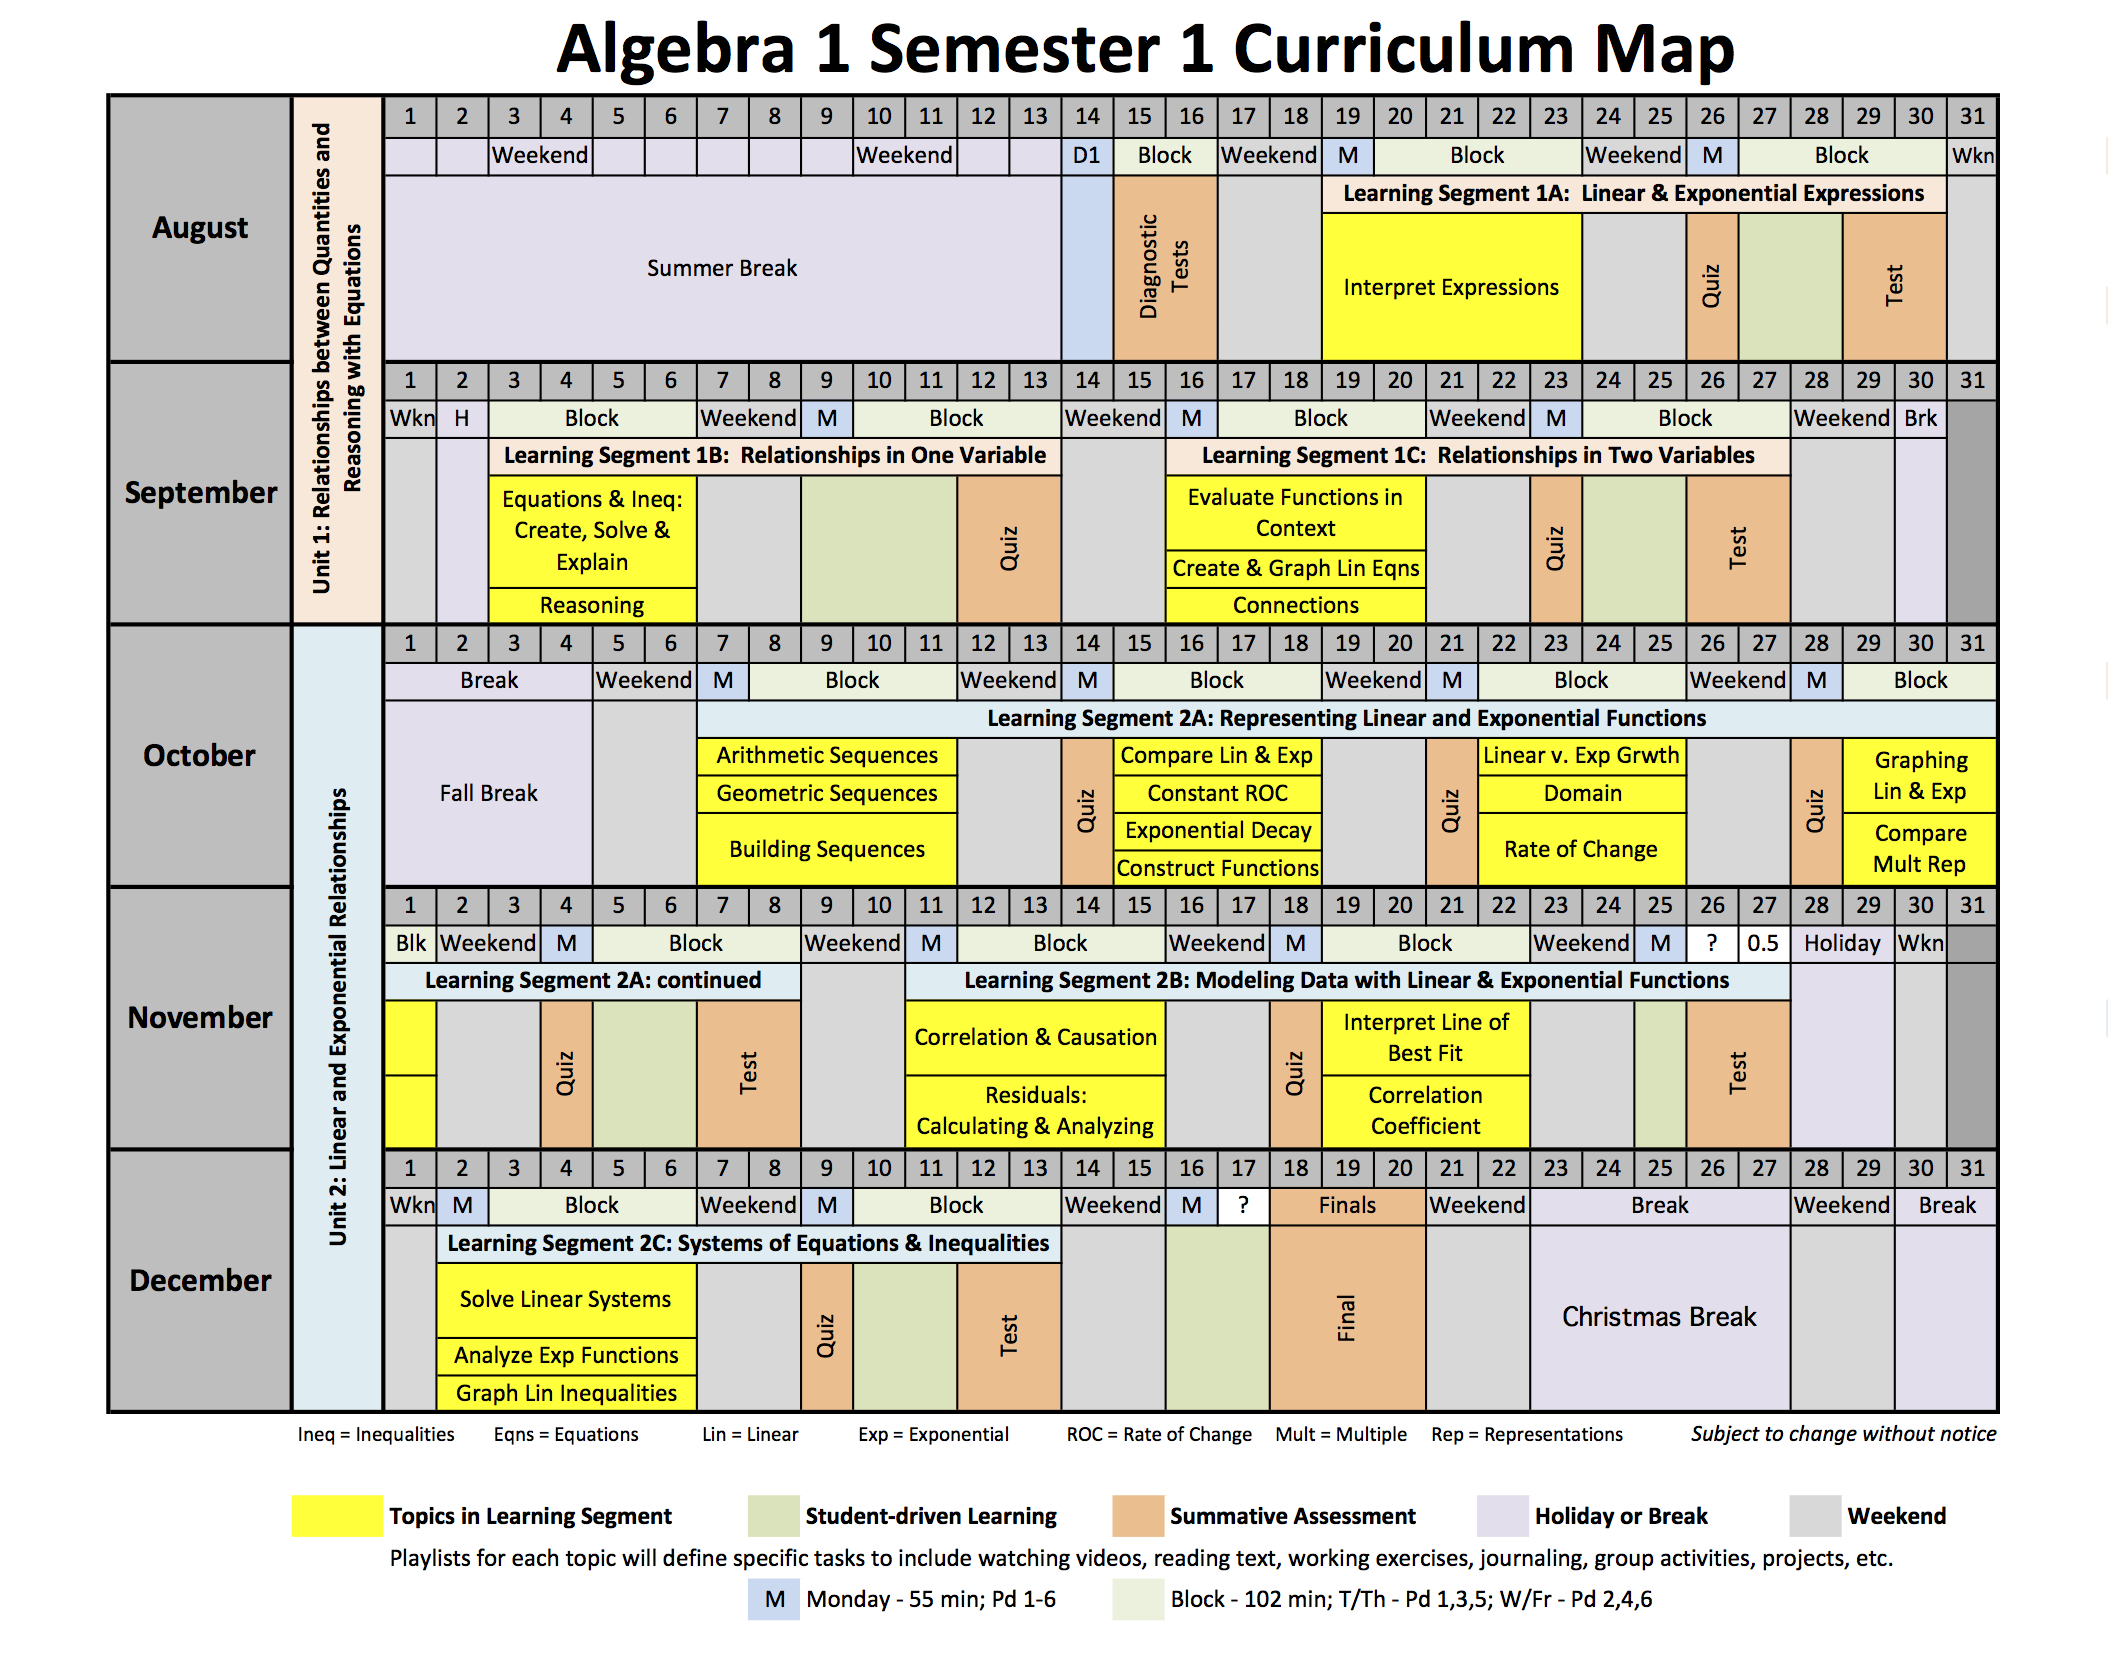 Careening Towards My Curriculum Maps | Reflections Of A Throughout Blank Curriculum Map Template